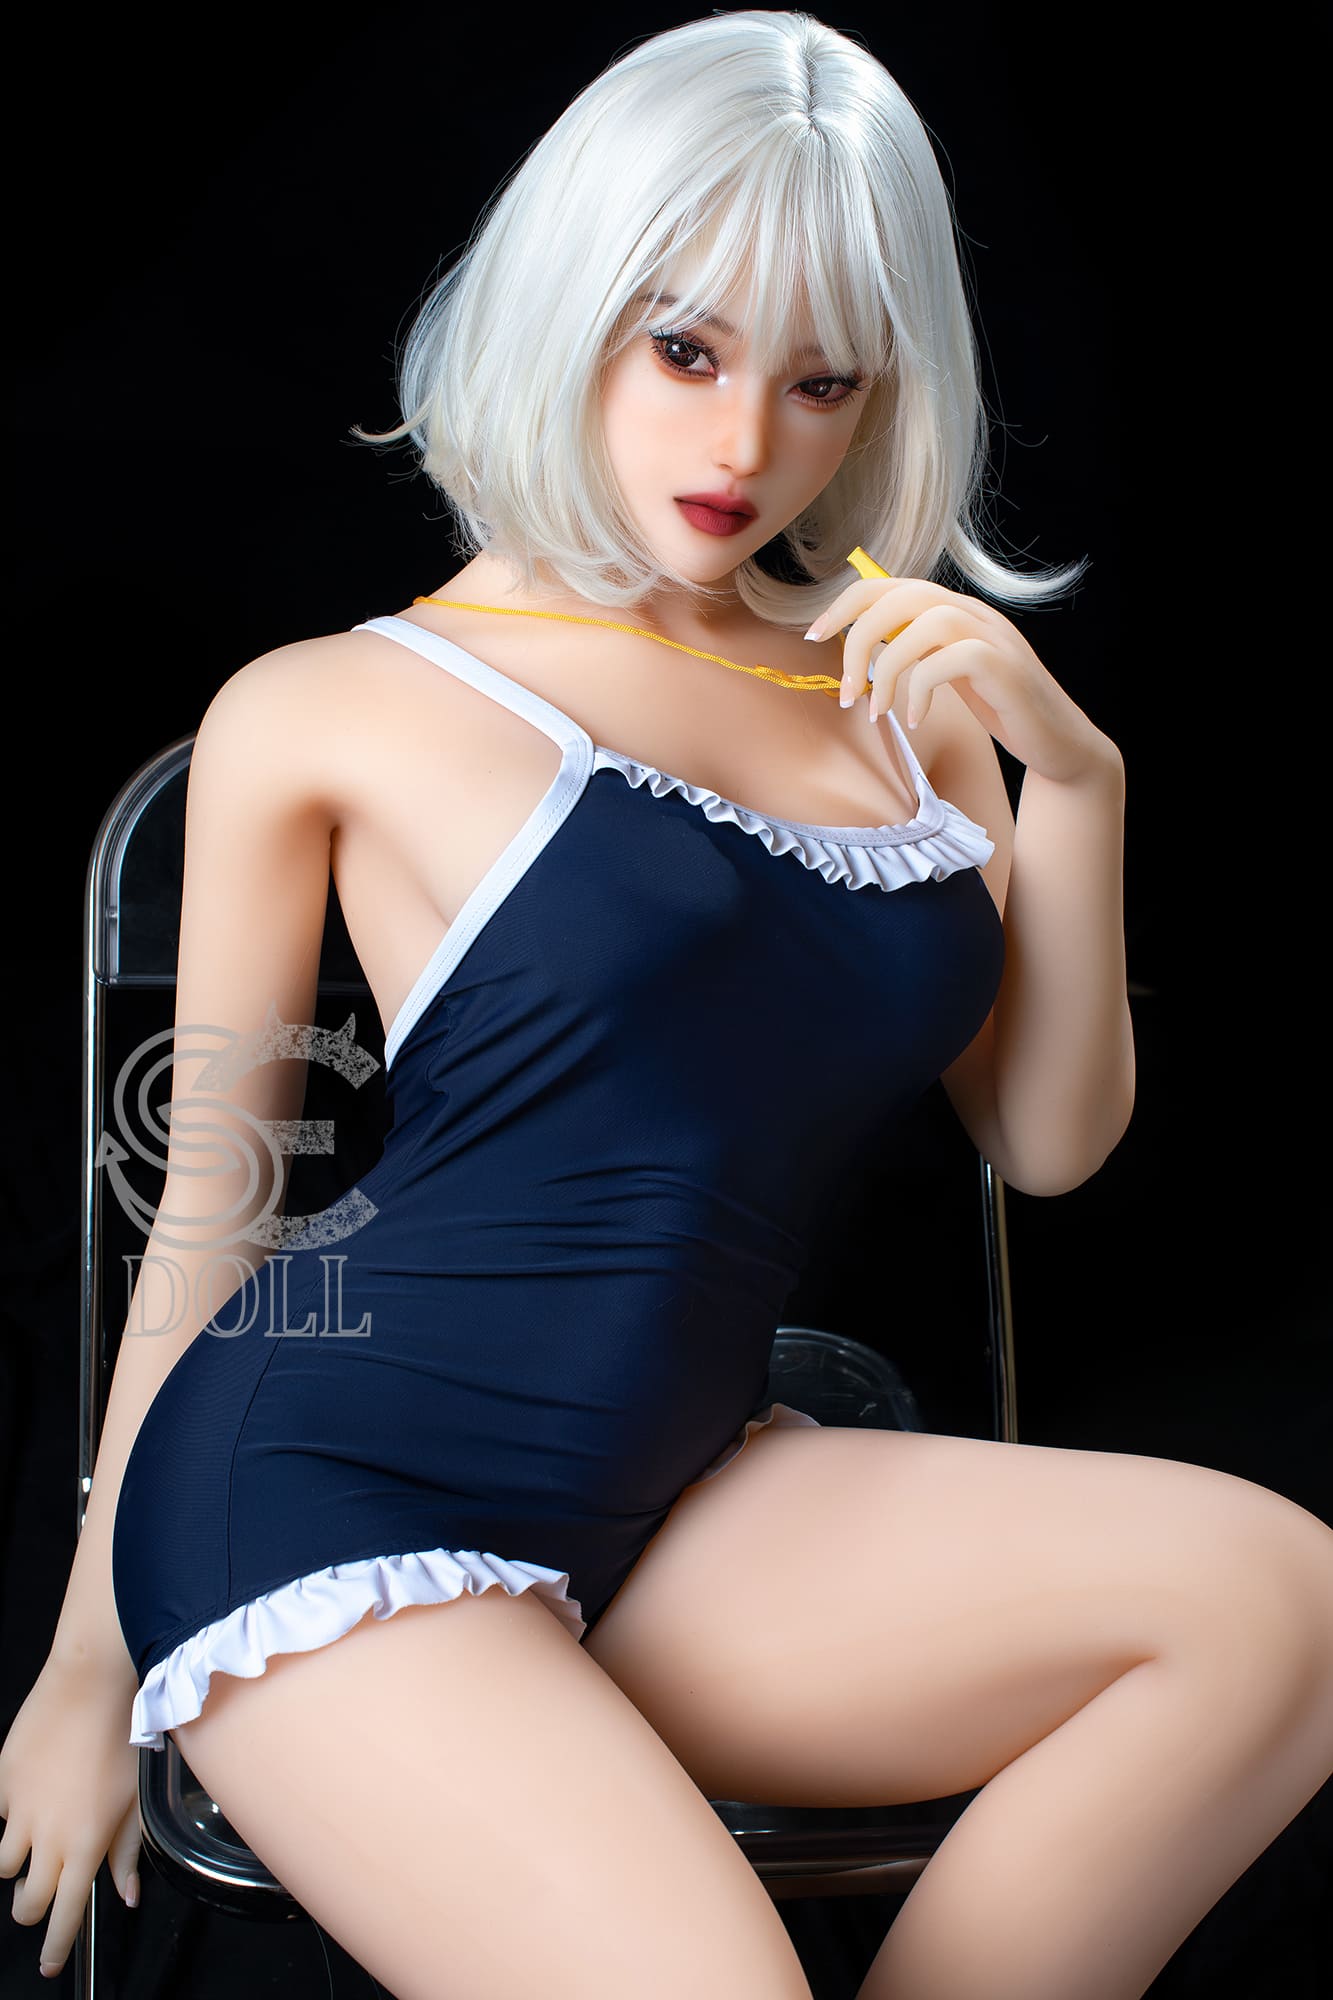 cosplay sex doll with cute face and blonde hair